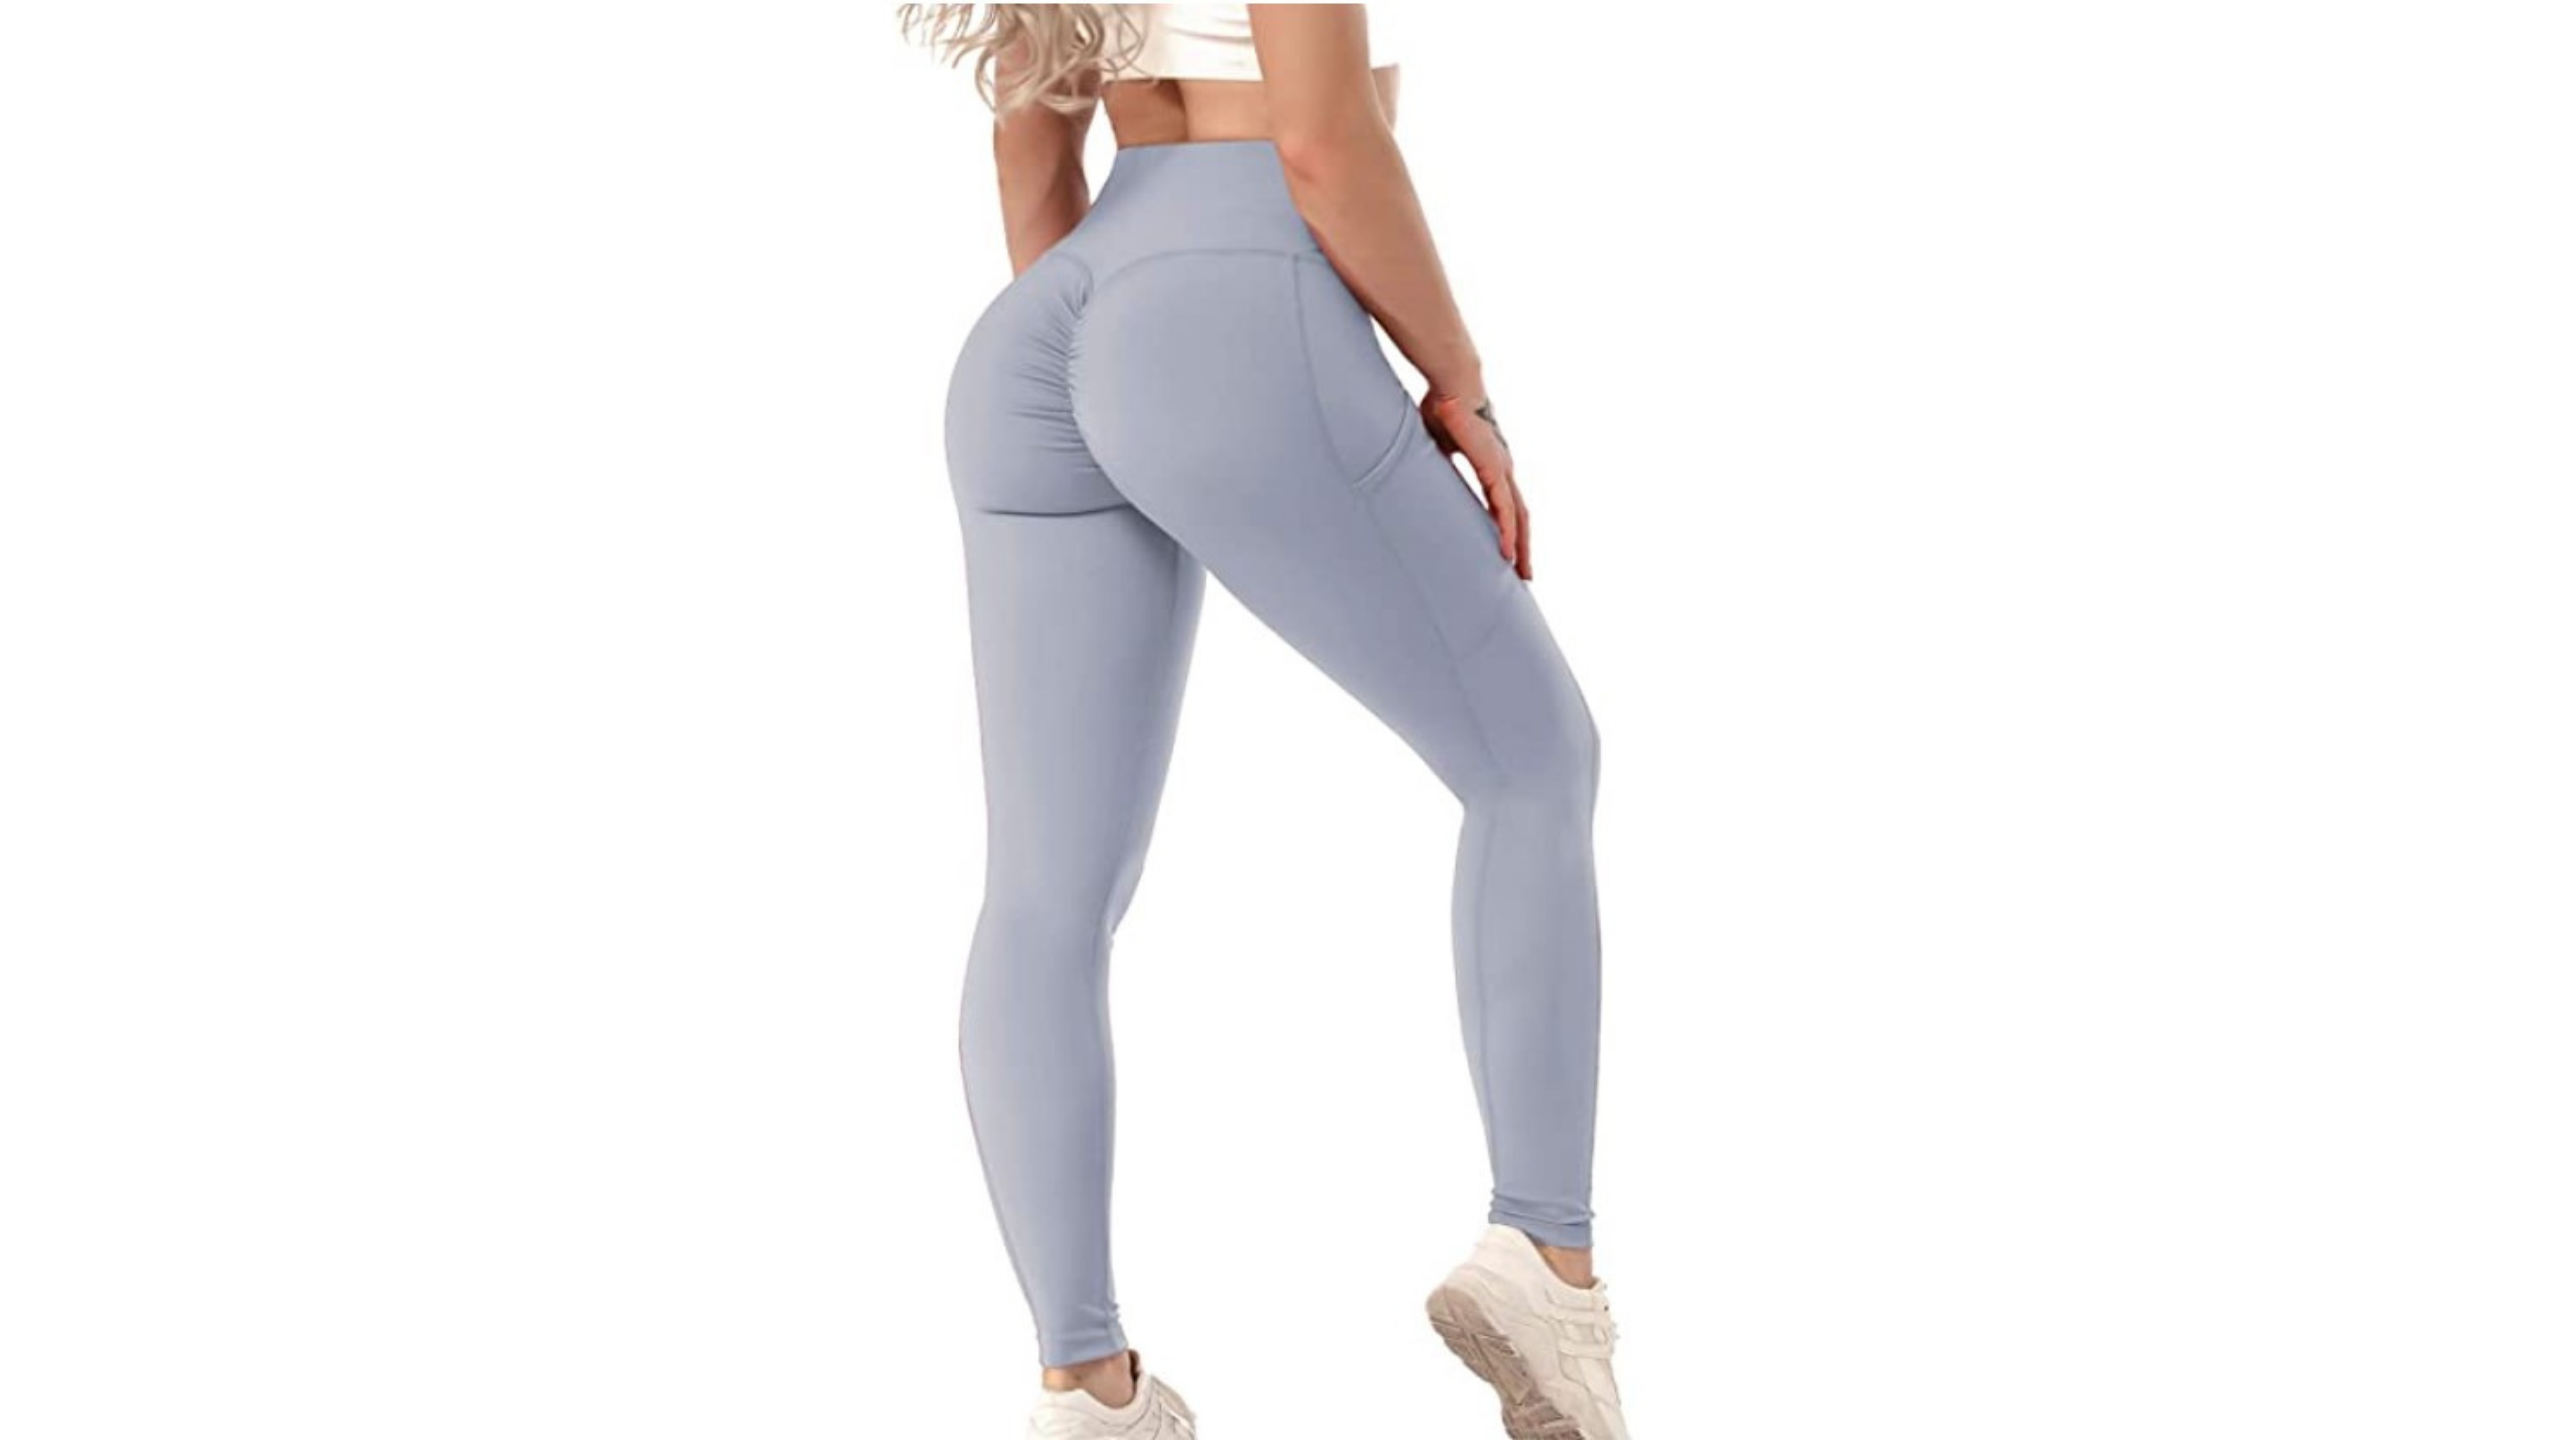 SEASUM Women High Waisted Yoga Pants Workout Butt Lifting Scrunch Booty  Leggings Tummy Control Anti Cellulite Textured Tights XS at Amazon Women's  Clothing store